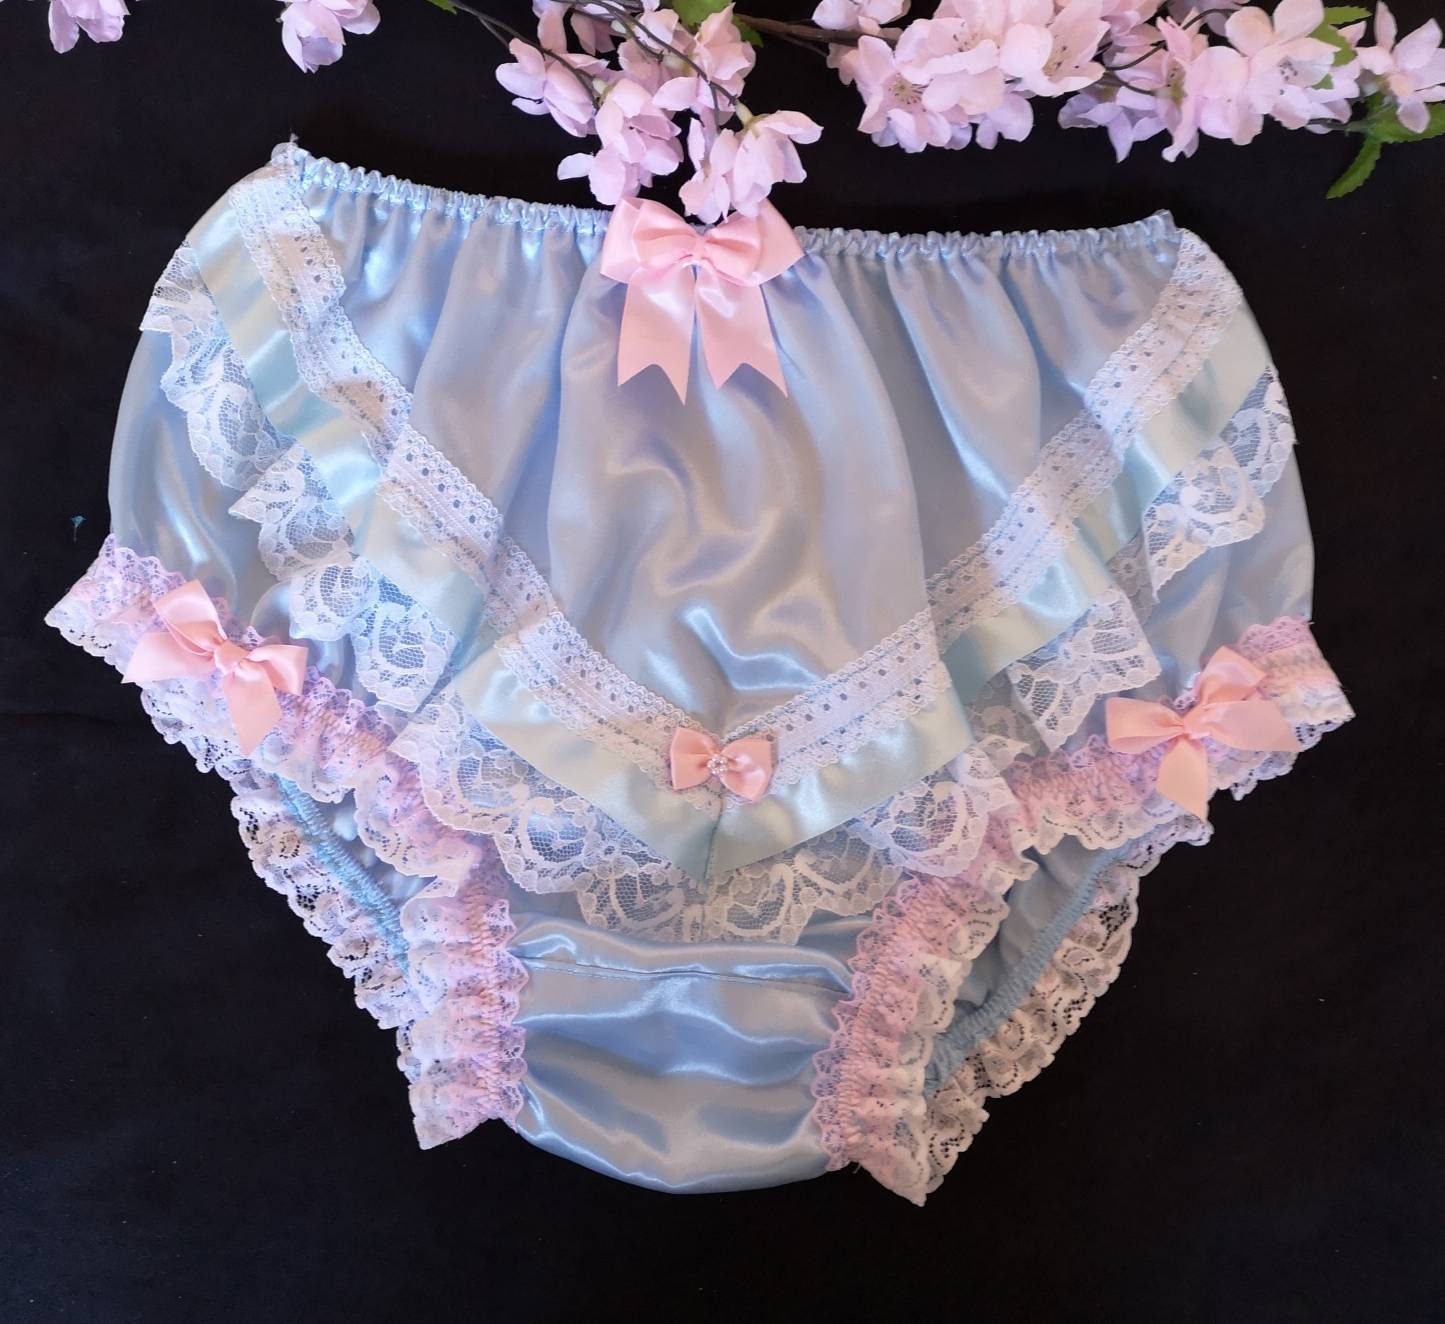 Pink Frilly Frothy Knickers, big frilly knickers, ruffle knickers, very  frilly knickers, adult sissy knickers, TV panties